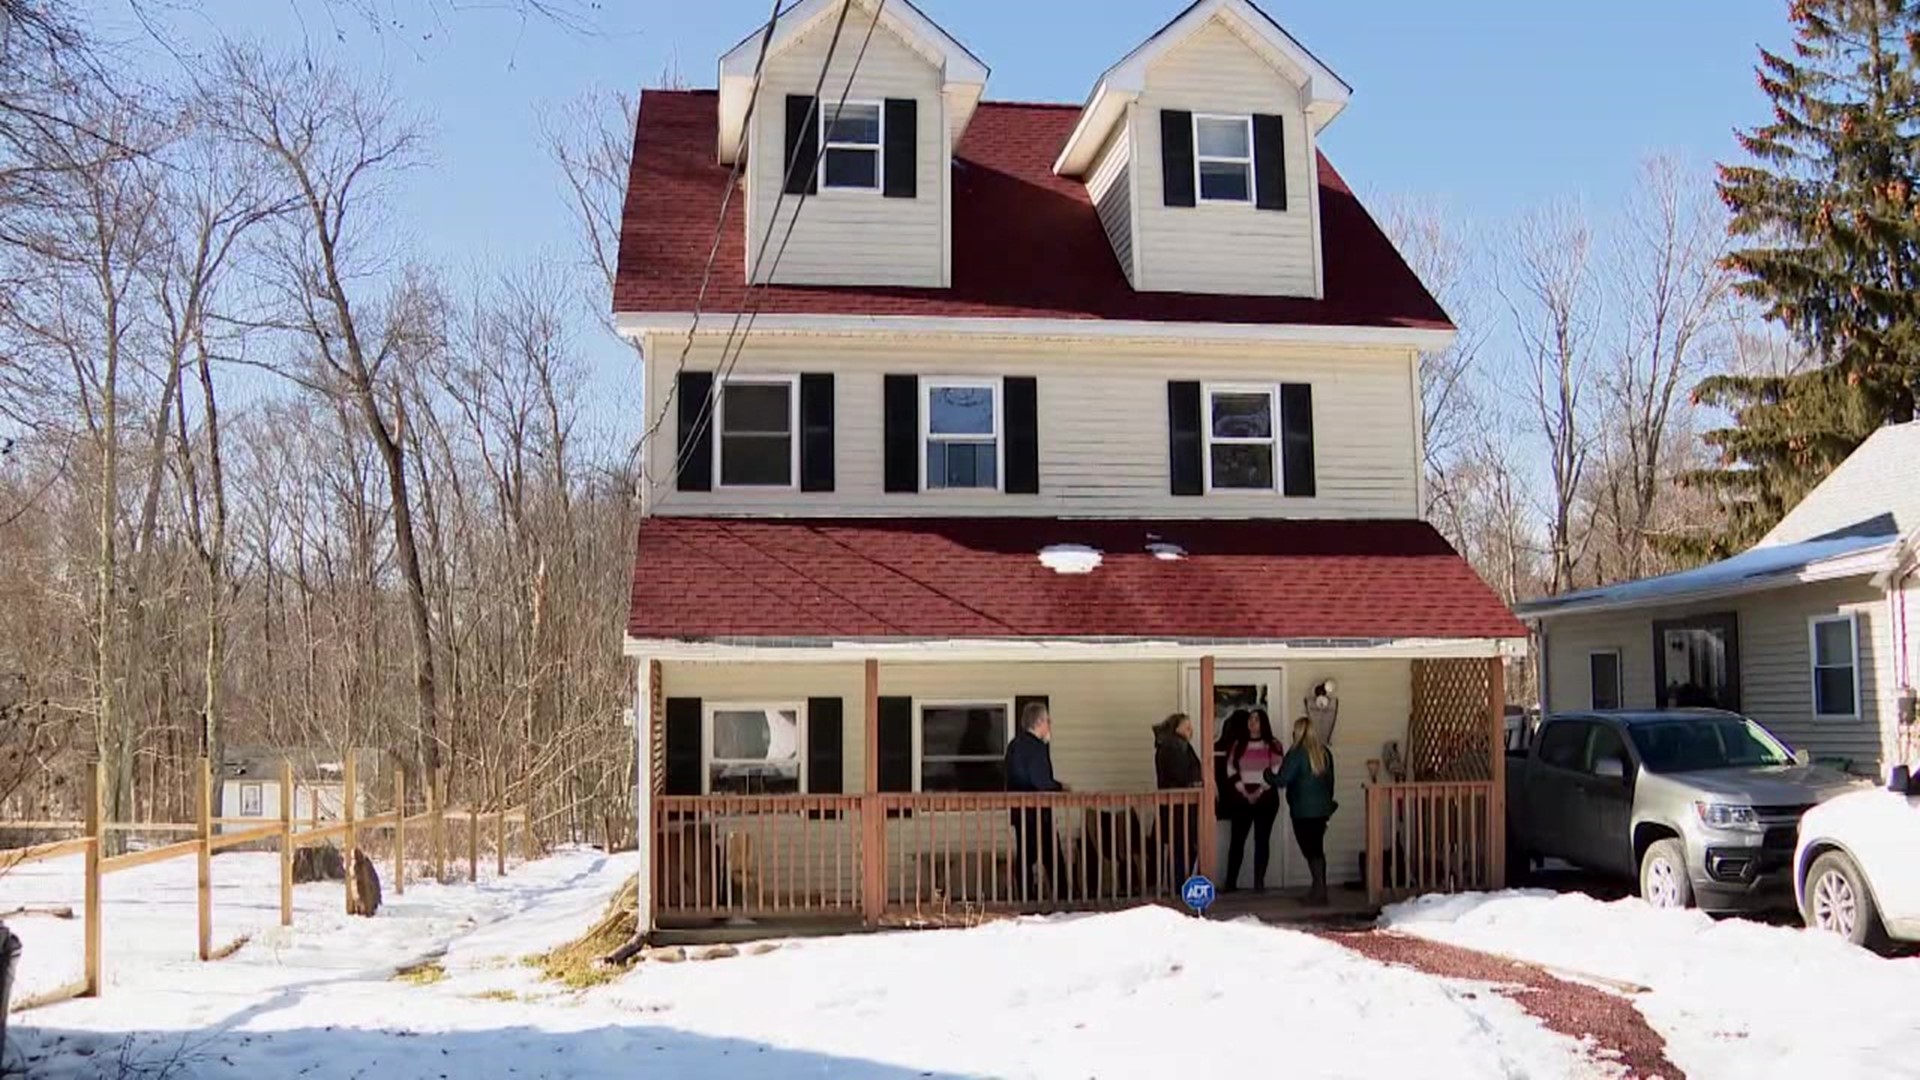 The recovery home near Tobyhanna is the first licensed recovery home in the commonwealth.